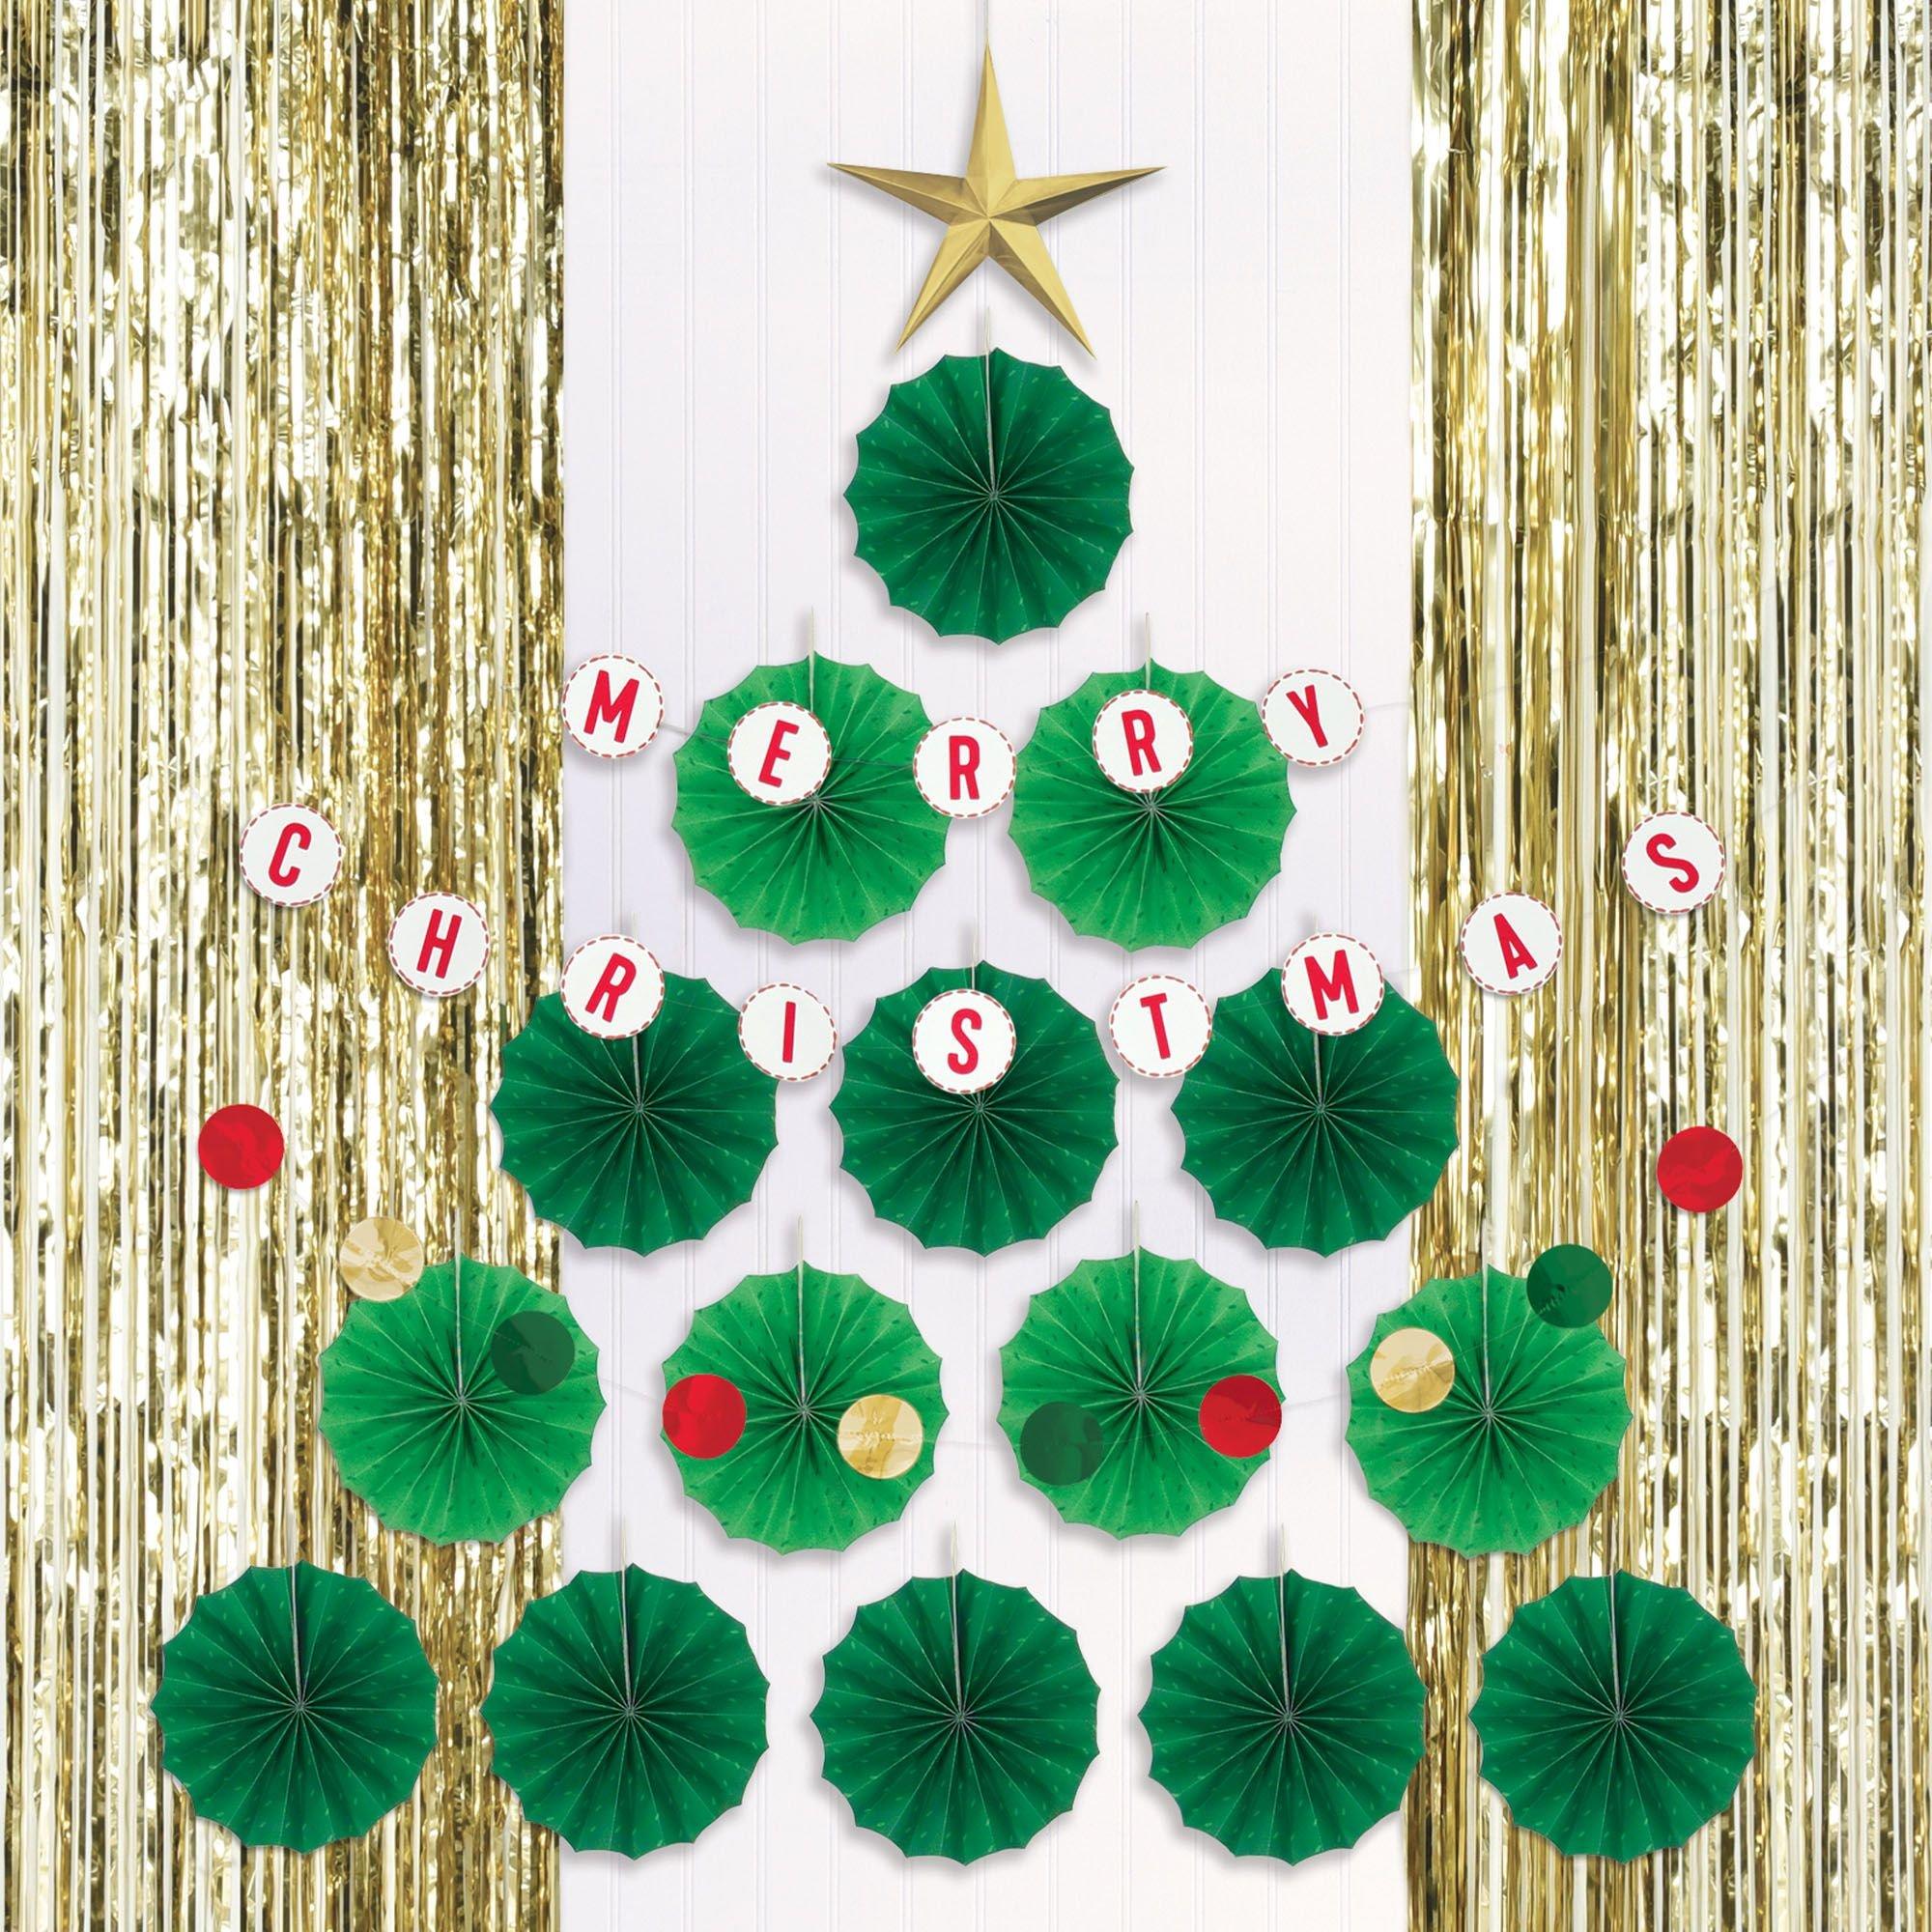 Christmas Tree Foil & Paper Wall Decorating Kit, 6ft x 6.5ft, 21pc ...